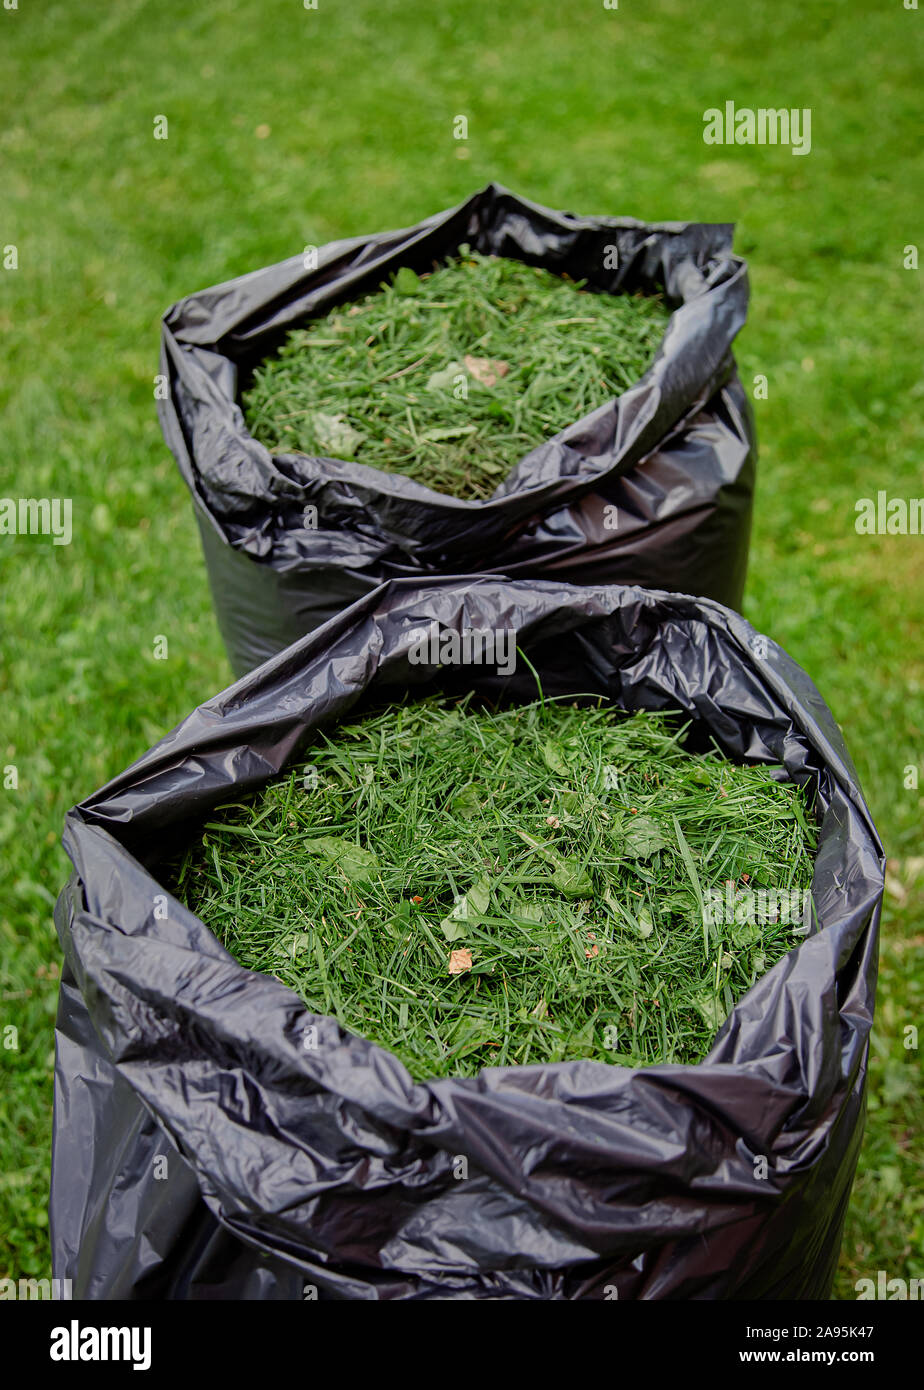 https://c8.alamy.com/comp/2A95K47/mowing-a-household-garden-lawn-with-black-bag-of-grass-clippings-grass-cuttings-in-a-black-plastic-bag-on-a-newly-trimmed-lawn-2A95K47.jpg